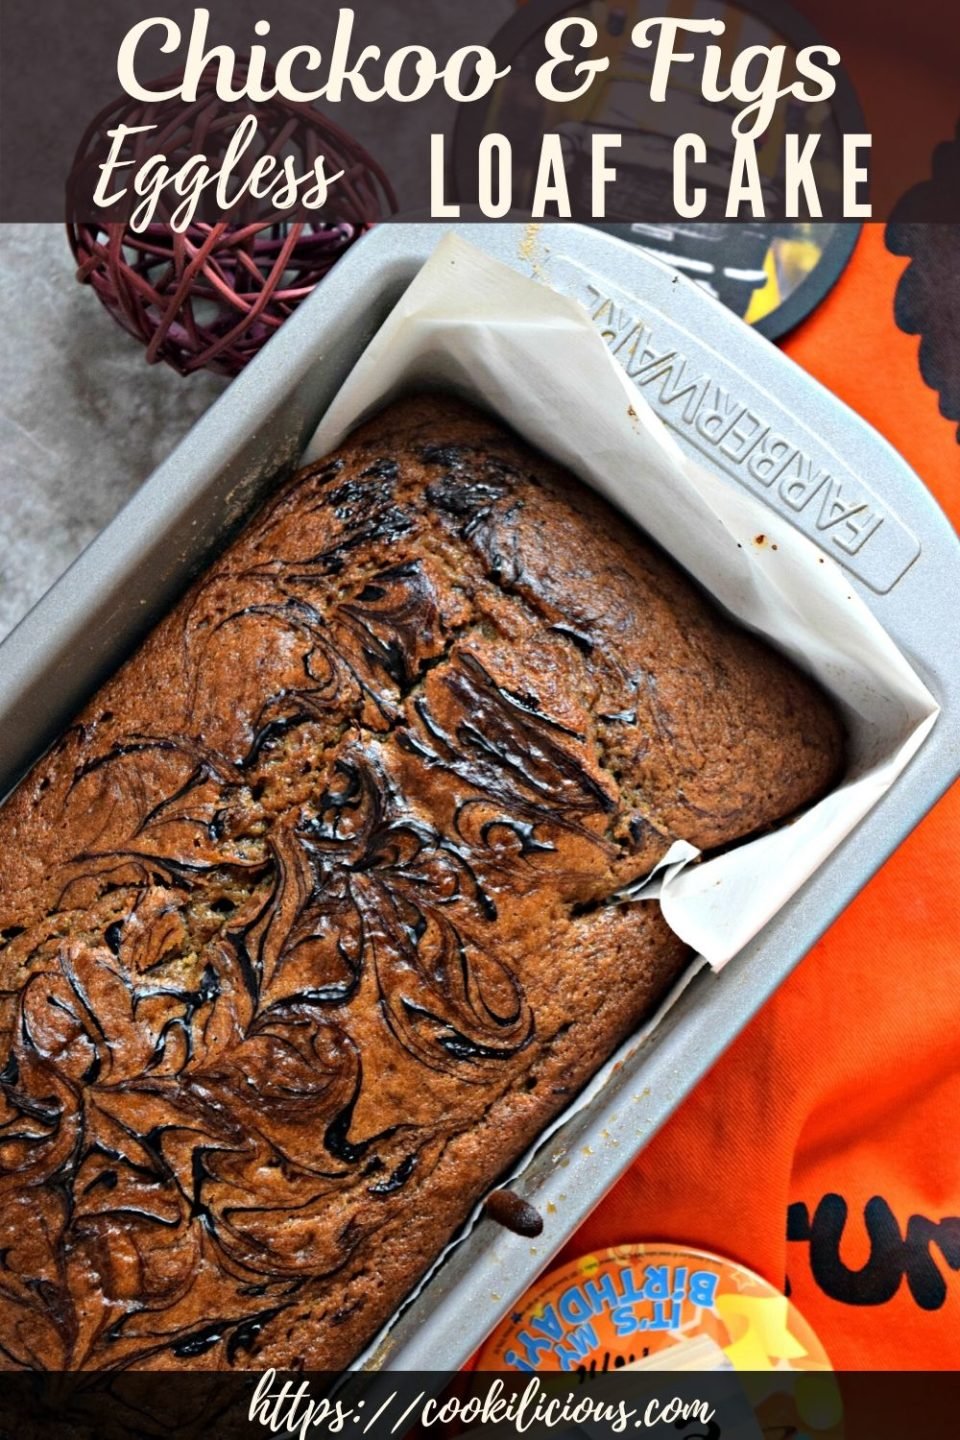 Eggless Chickoo Fig Loaf Cake freshly baked out of the oven with text at the top and bottom